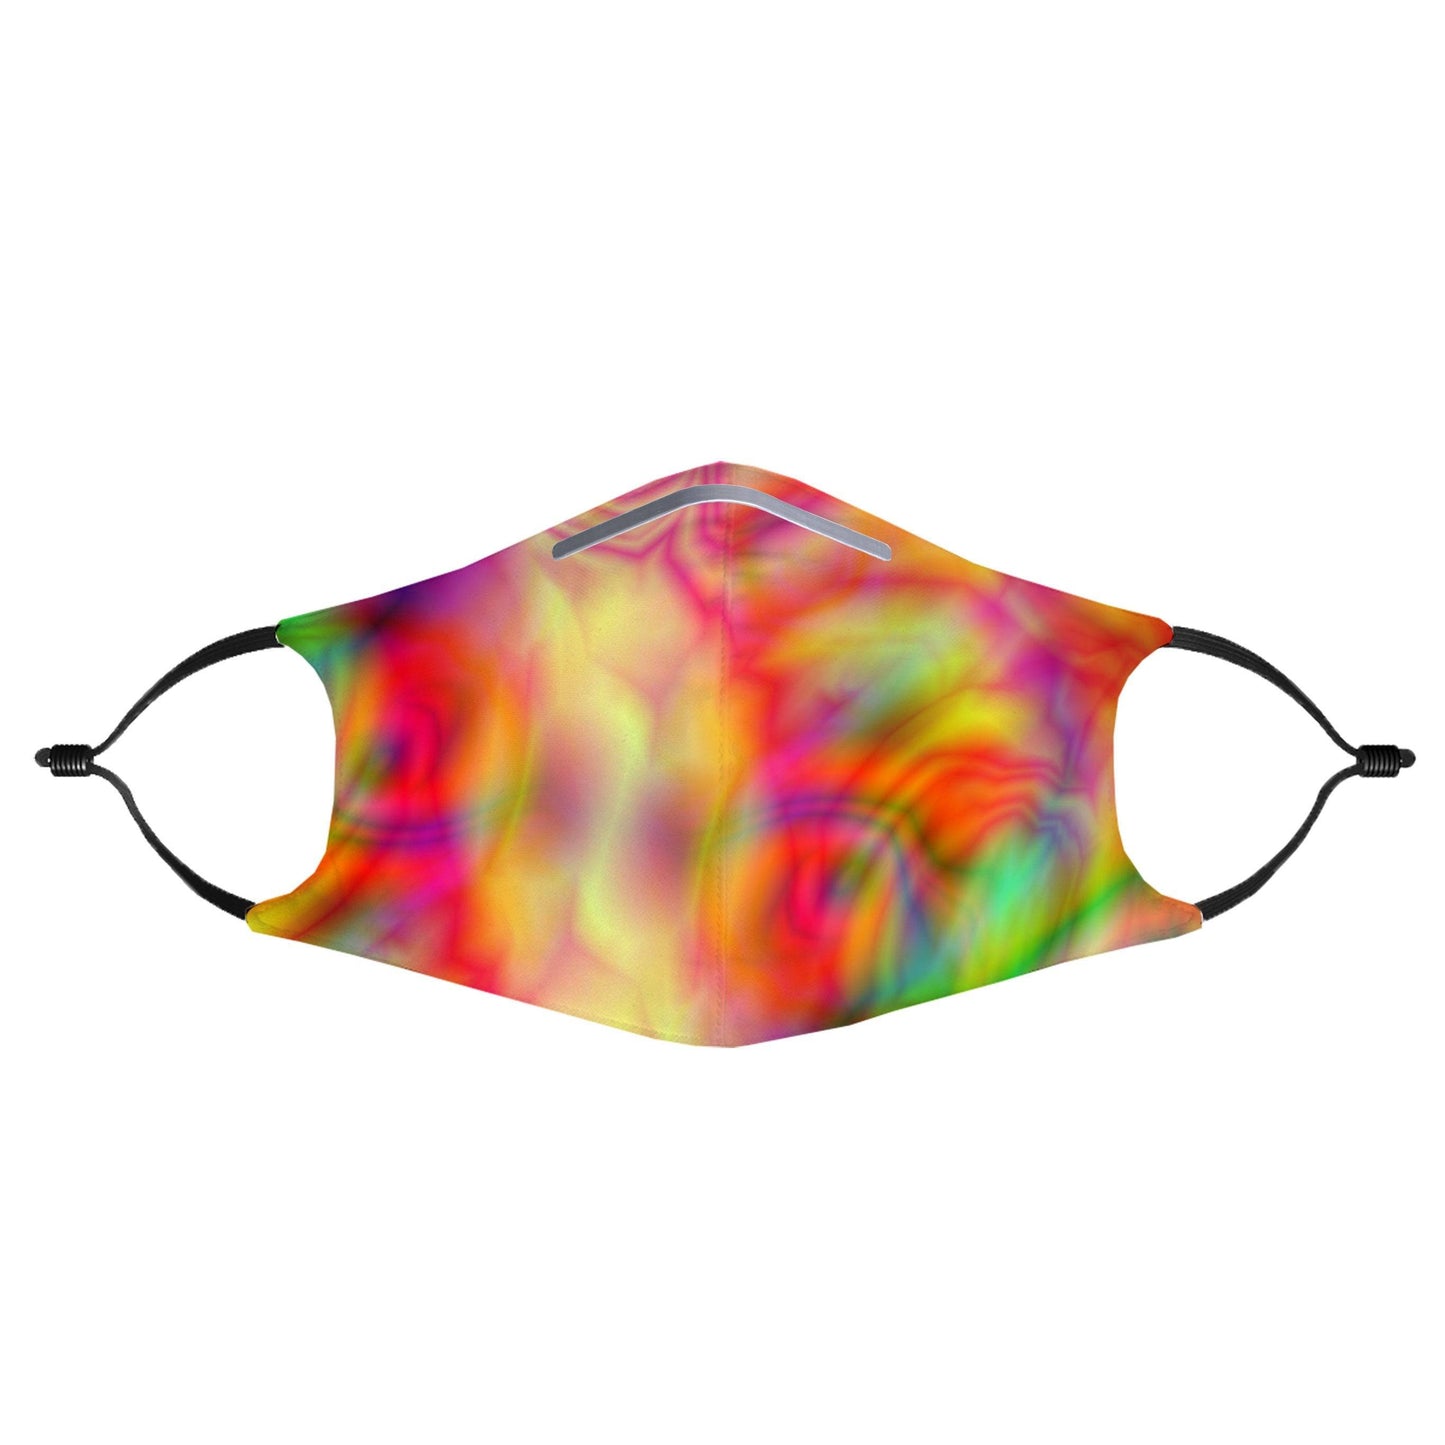 Psychedelic Dream Face Mask With (4) PM 2.5 Carbon Inserts, Yantrart Design, | iEDM